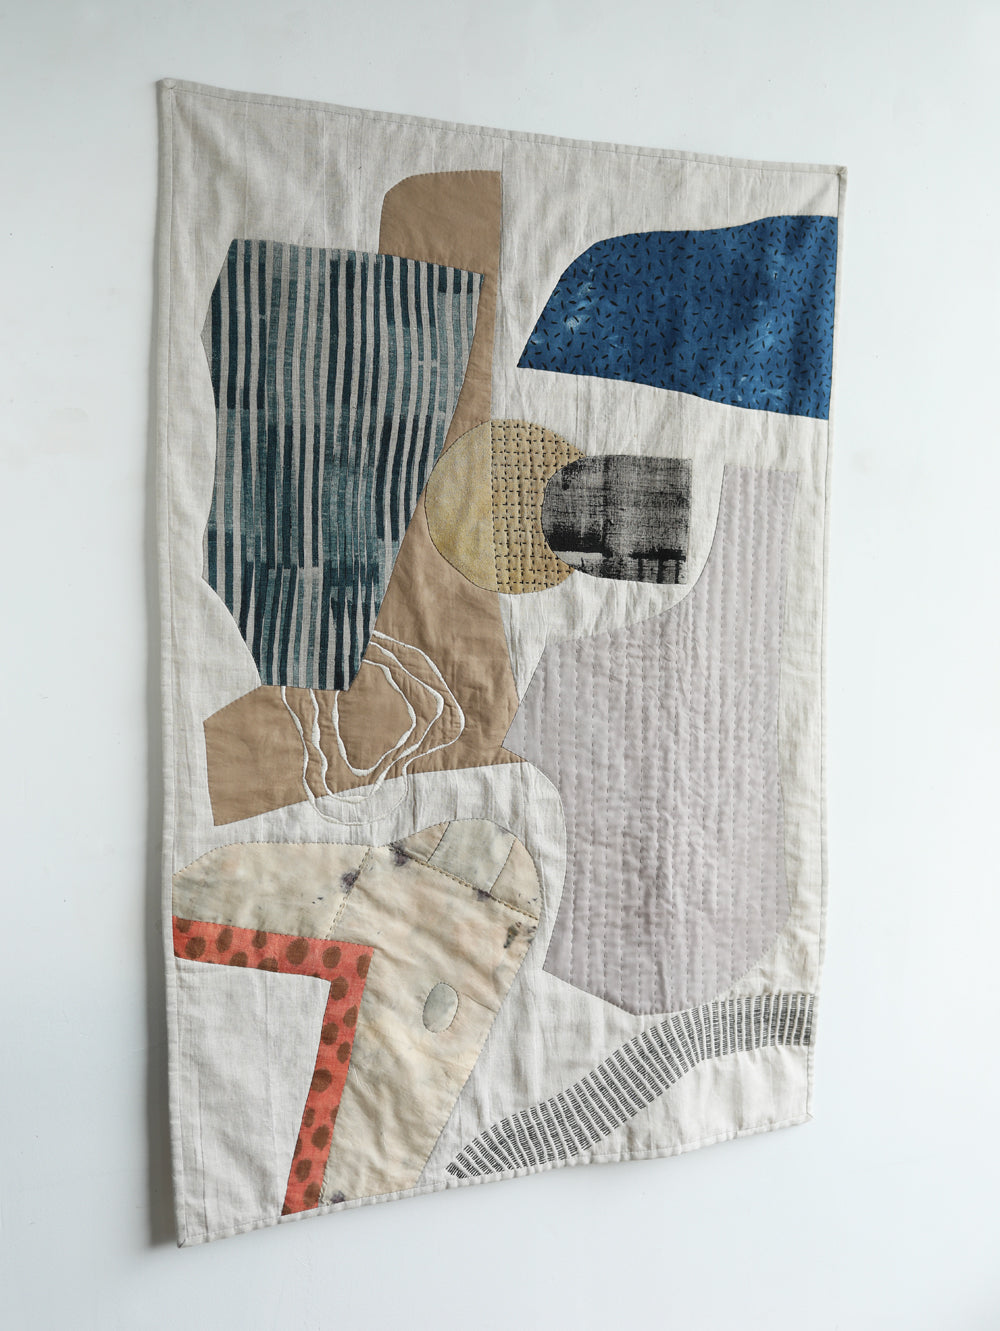 WALL QUILT - imagined landscape